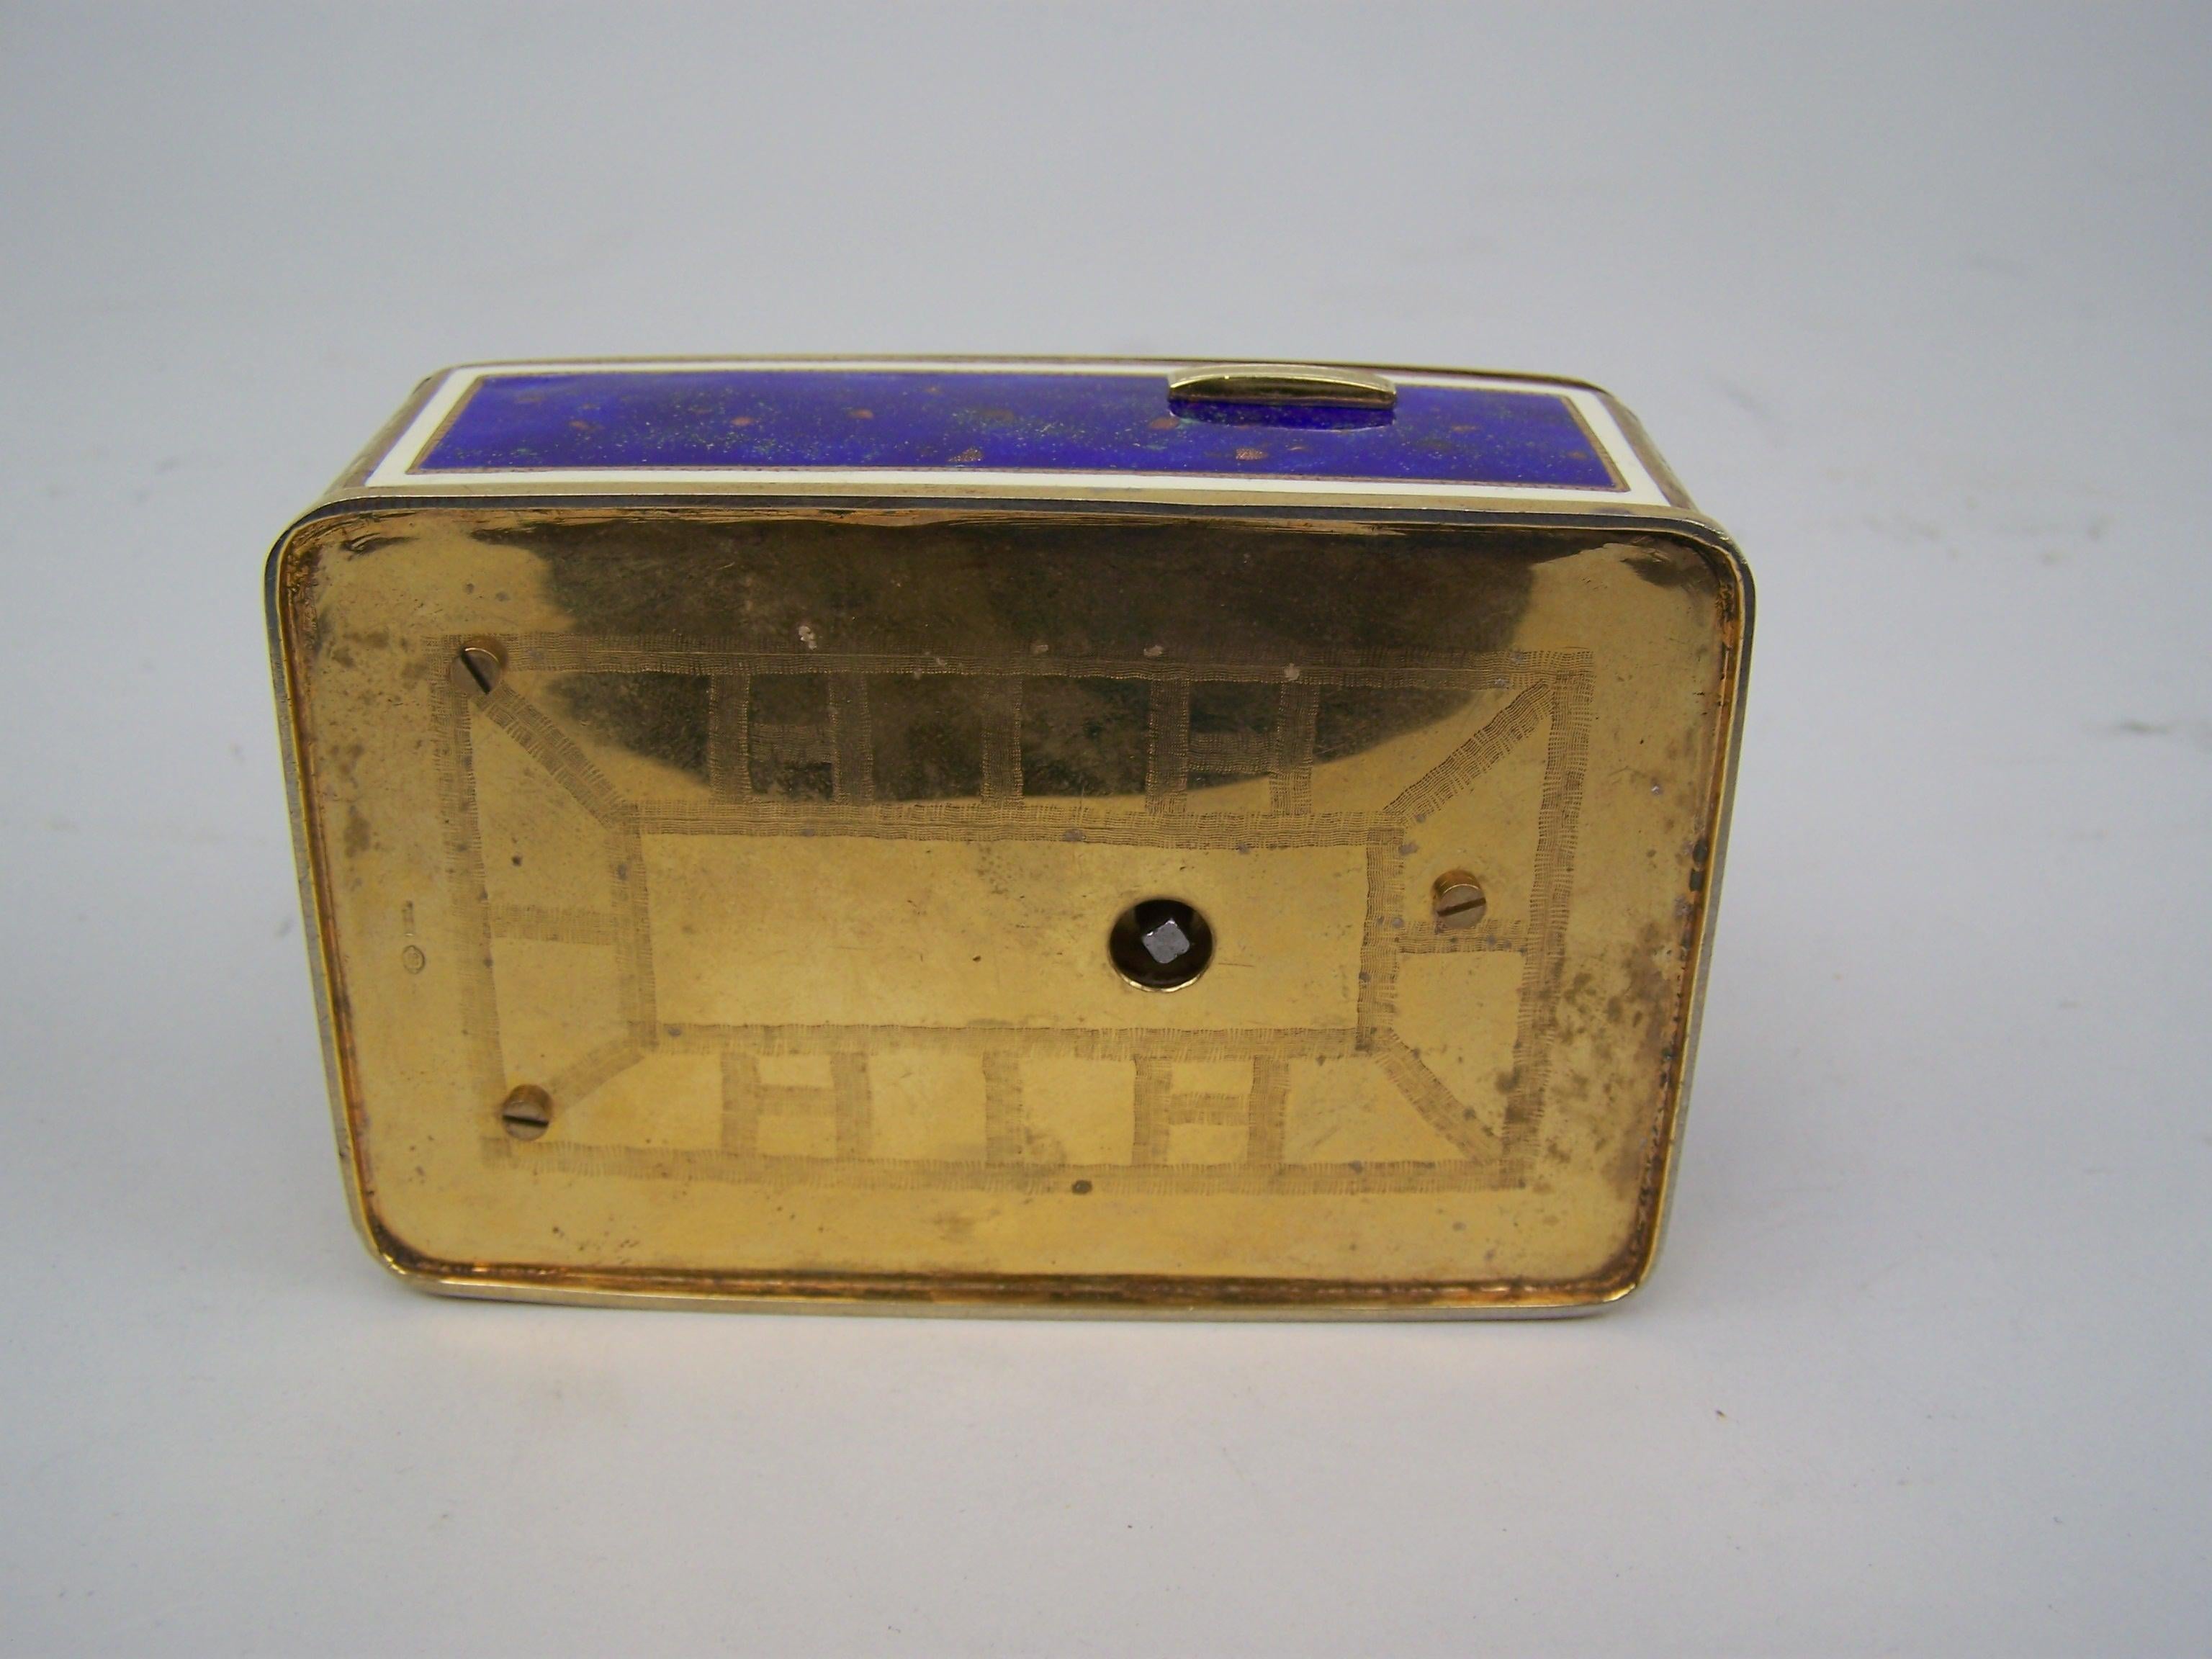 Other Singing bird box by K Griesbaum in guilded case and blue-goldflaked enamel